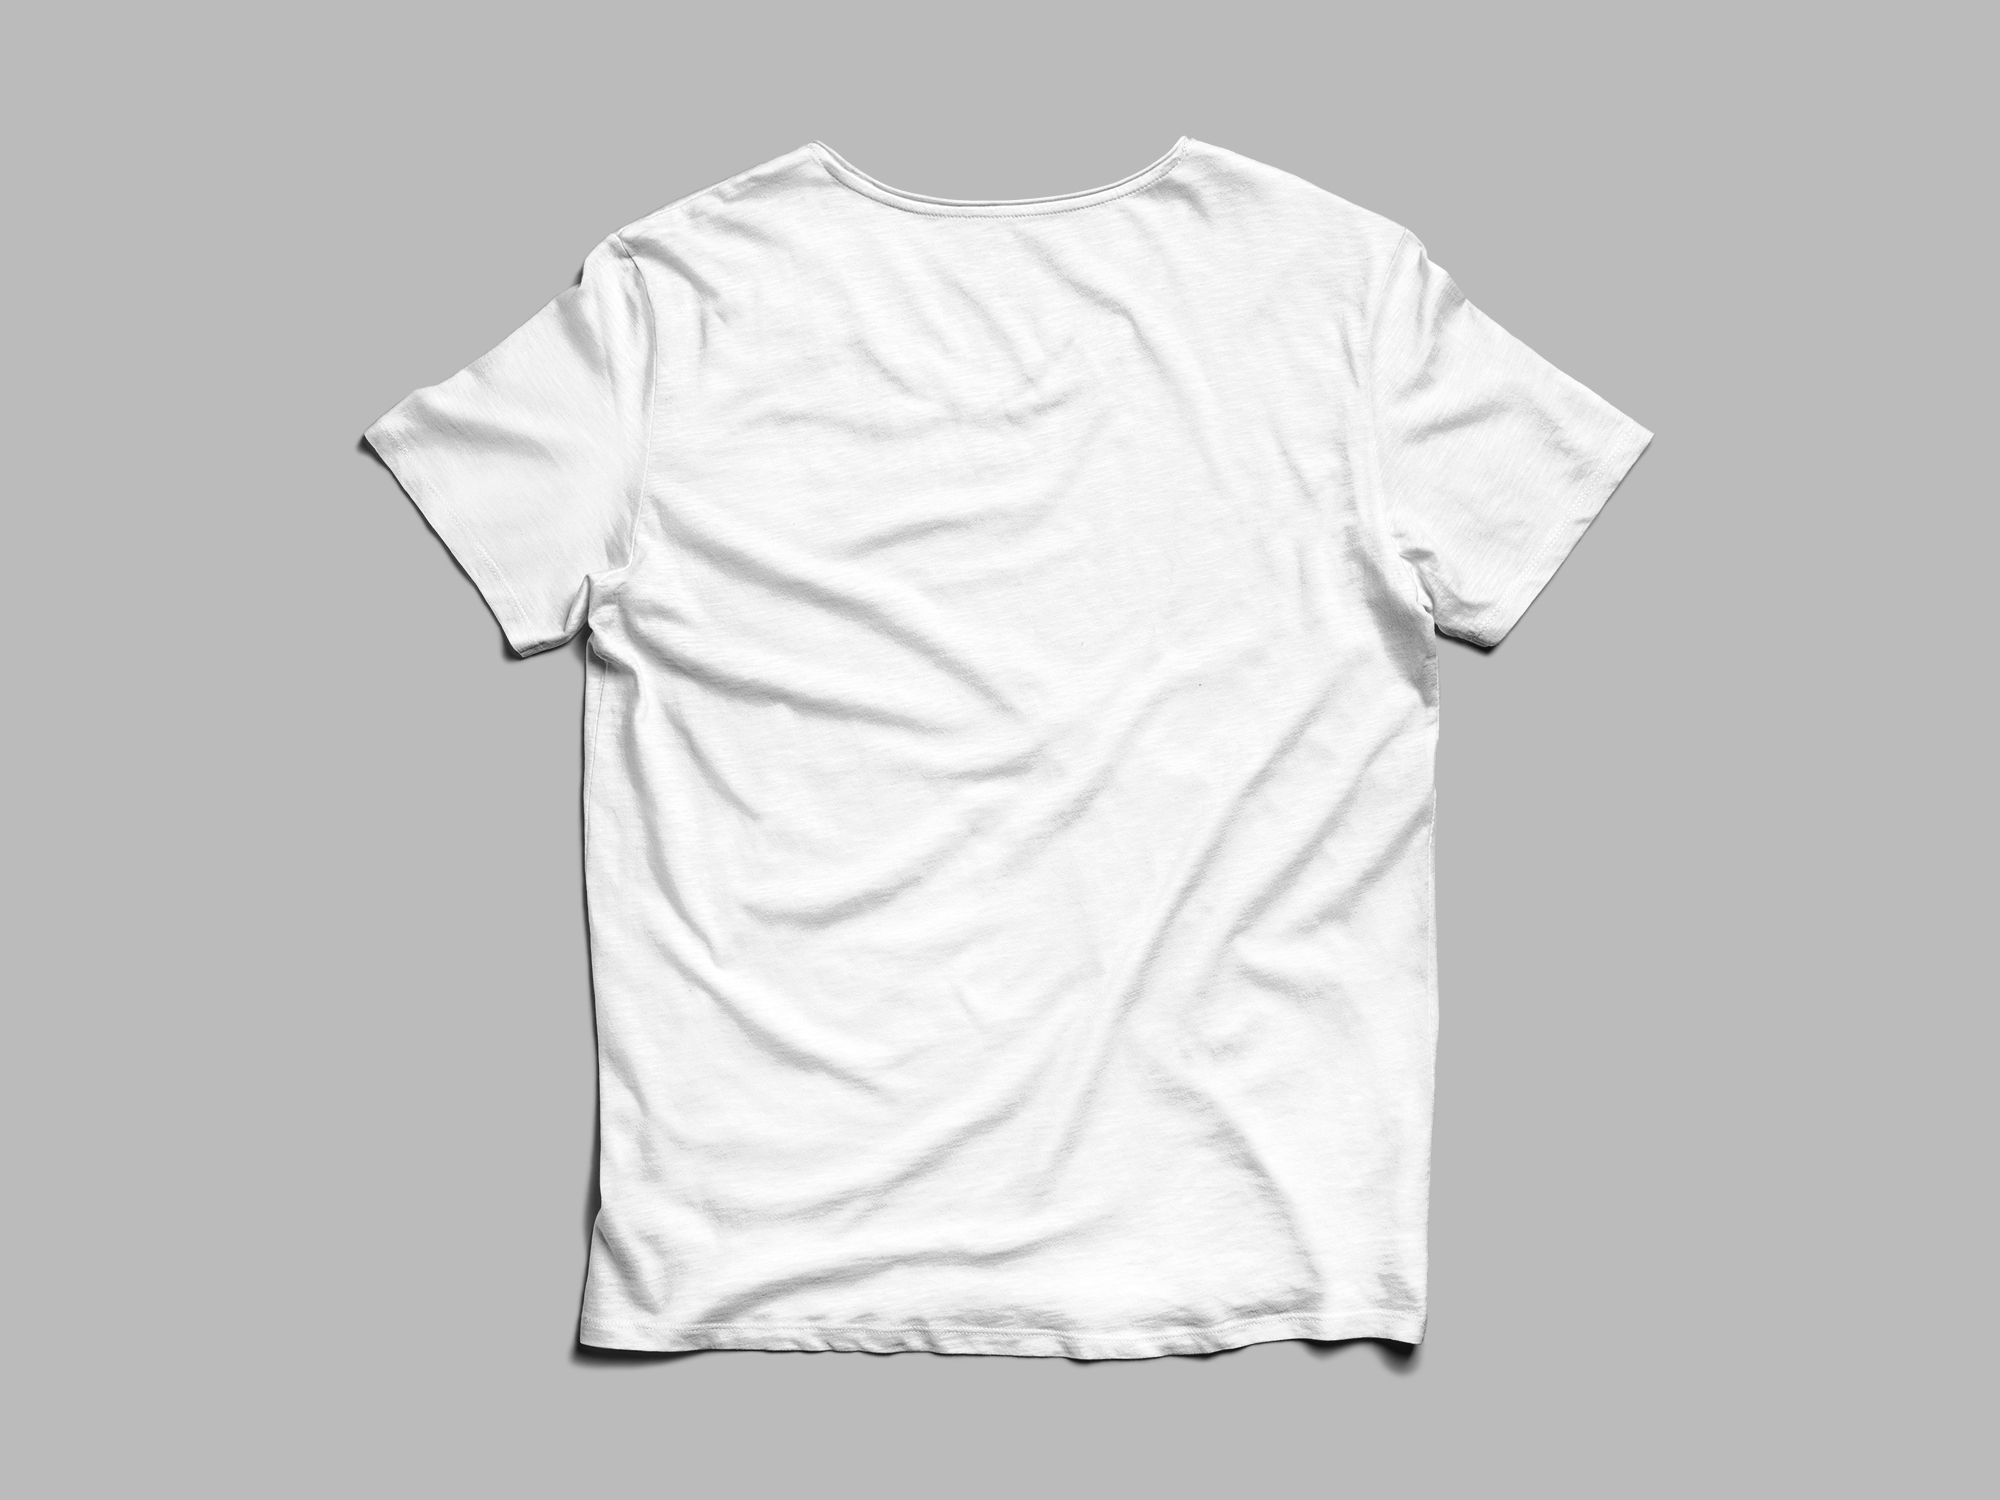 t shirt mockup front and back psd free download